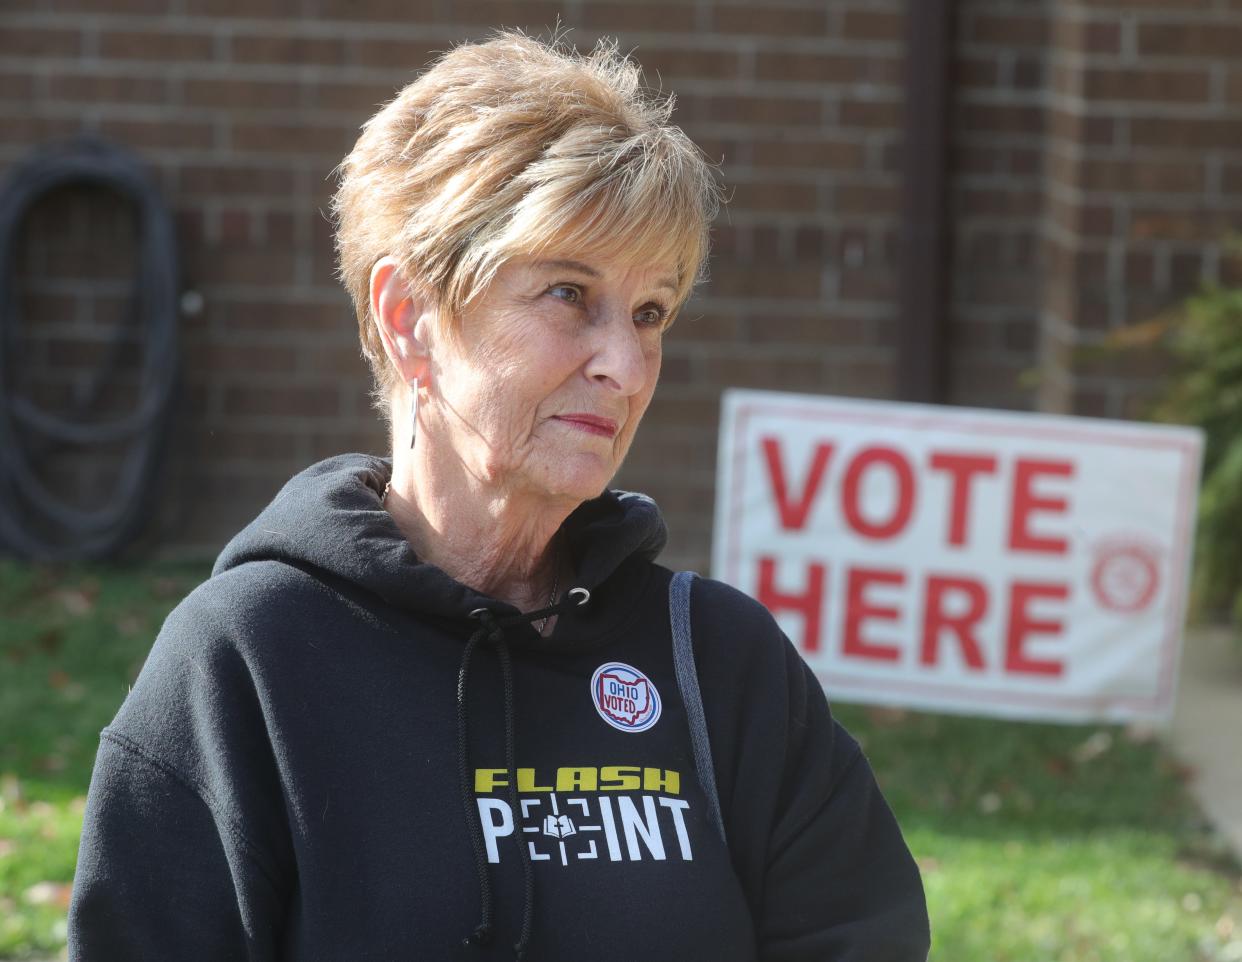 Linda Carter talks about casting her vote on issues 1 and 2 outside the polling place on Tuesday in Norton.